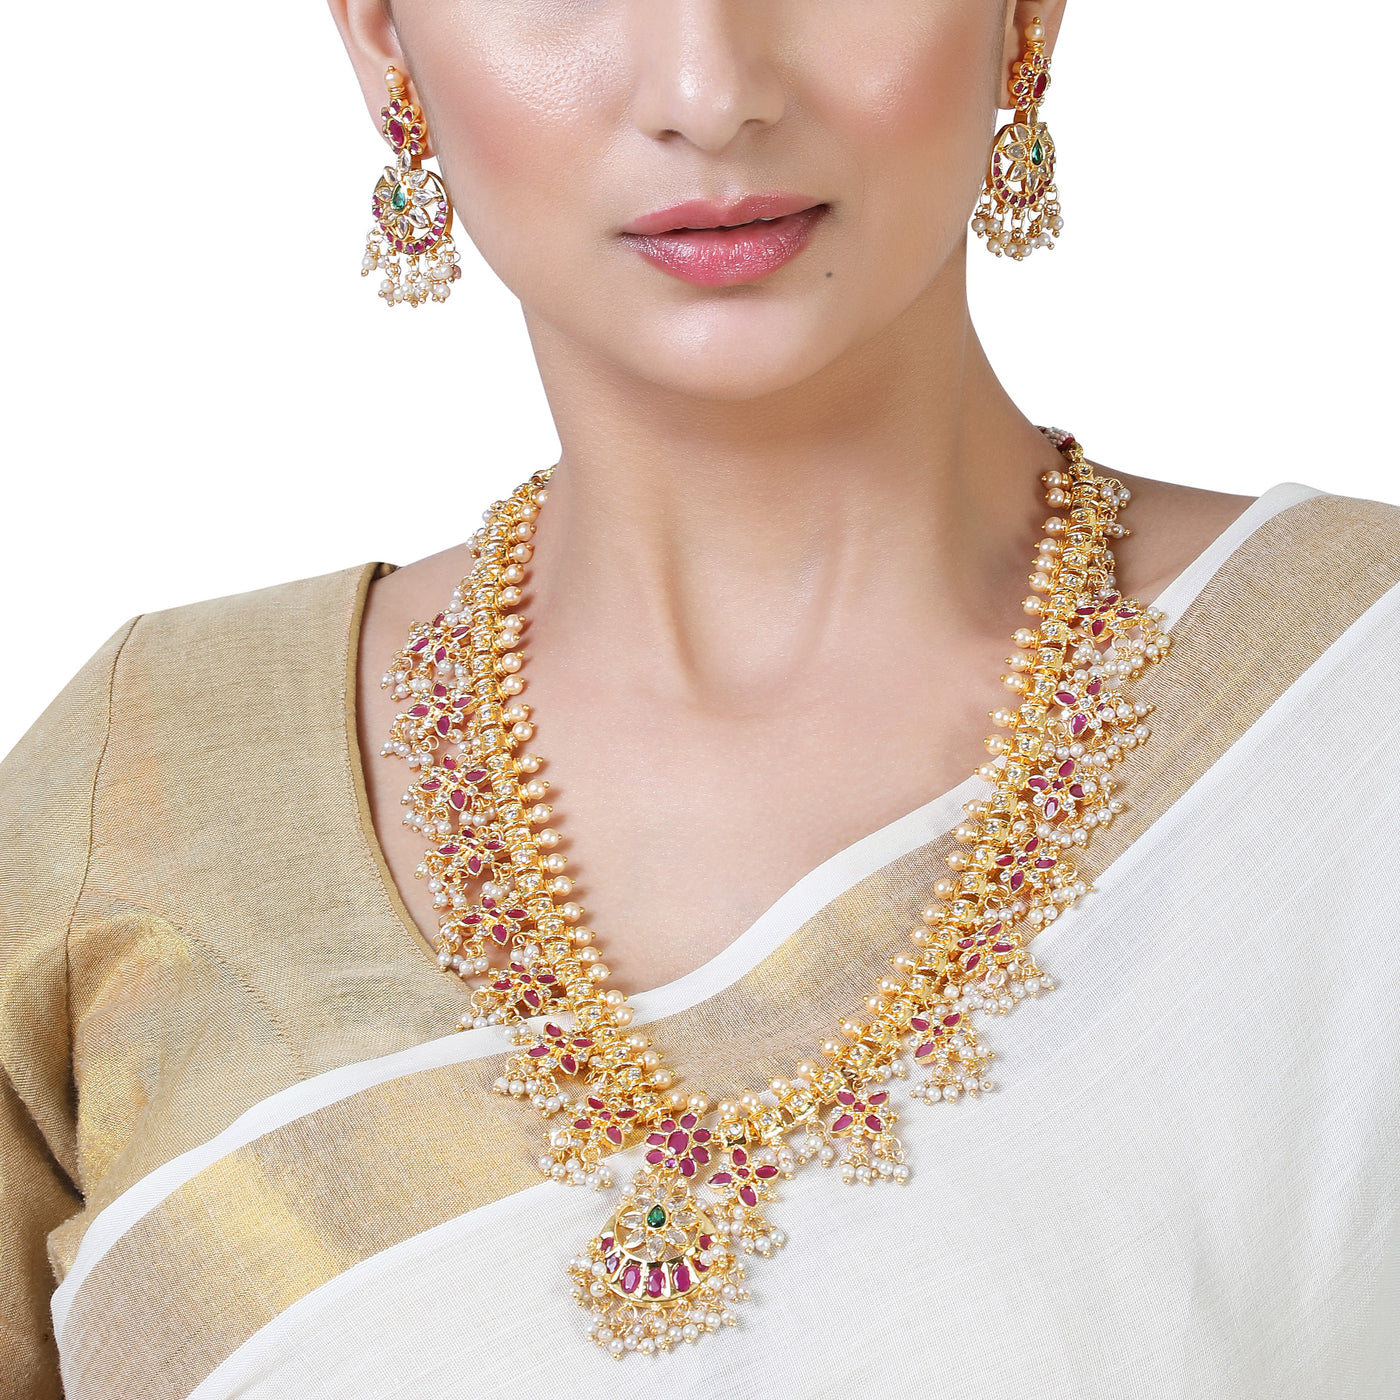 Estele Gold Plated MachliPatnam Long Necklace Set with Intricate Pearls work and Colored Stones for Women